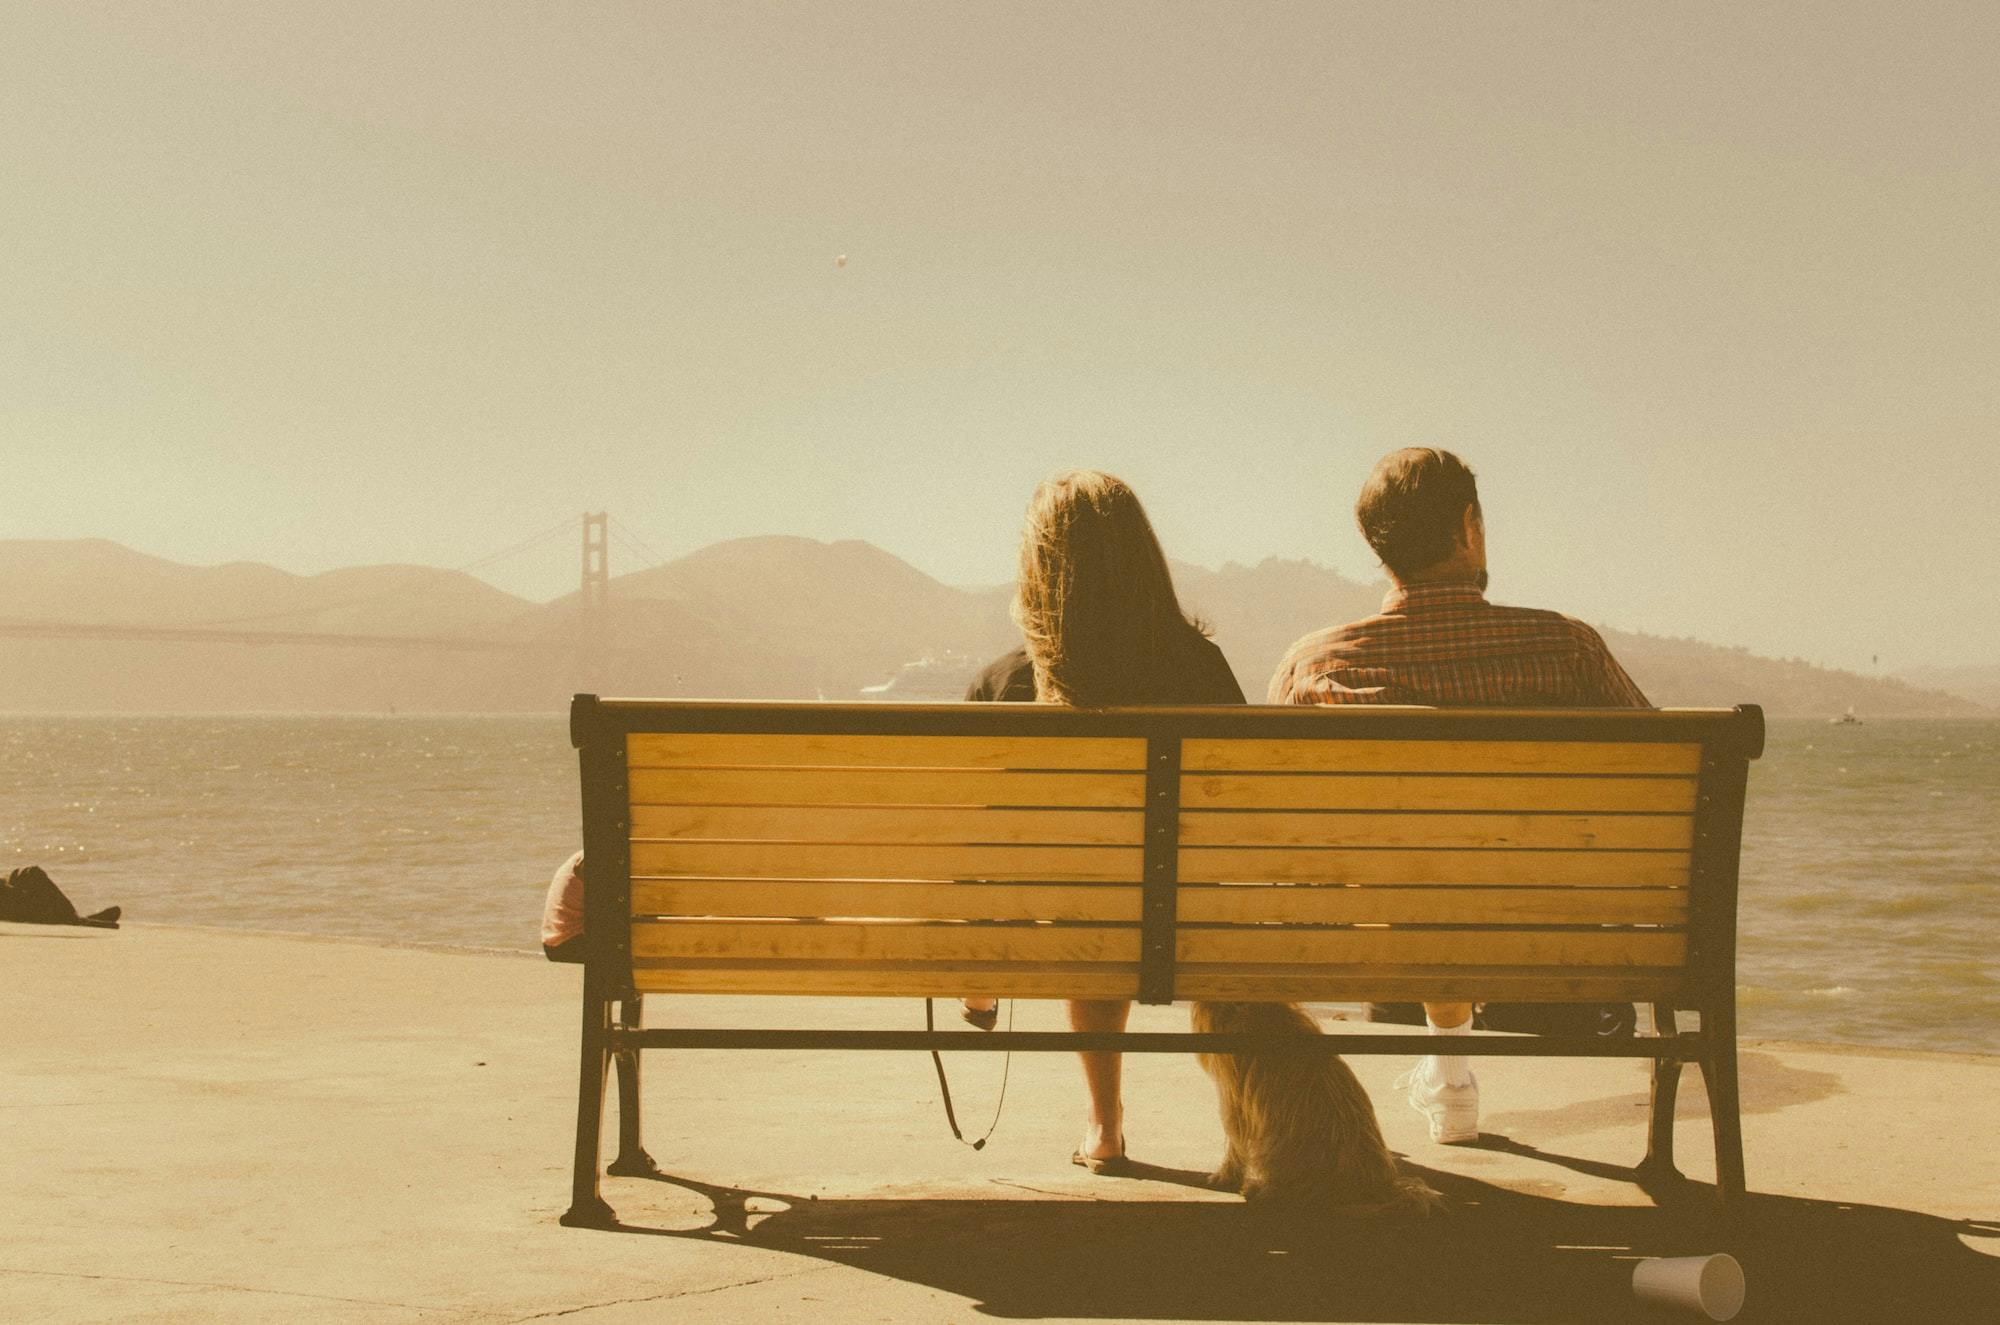 Couple on bench looking away from each other